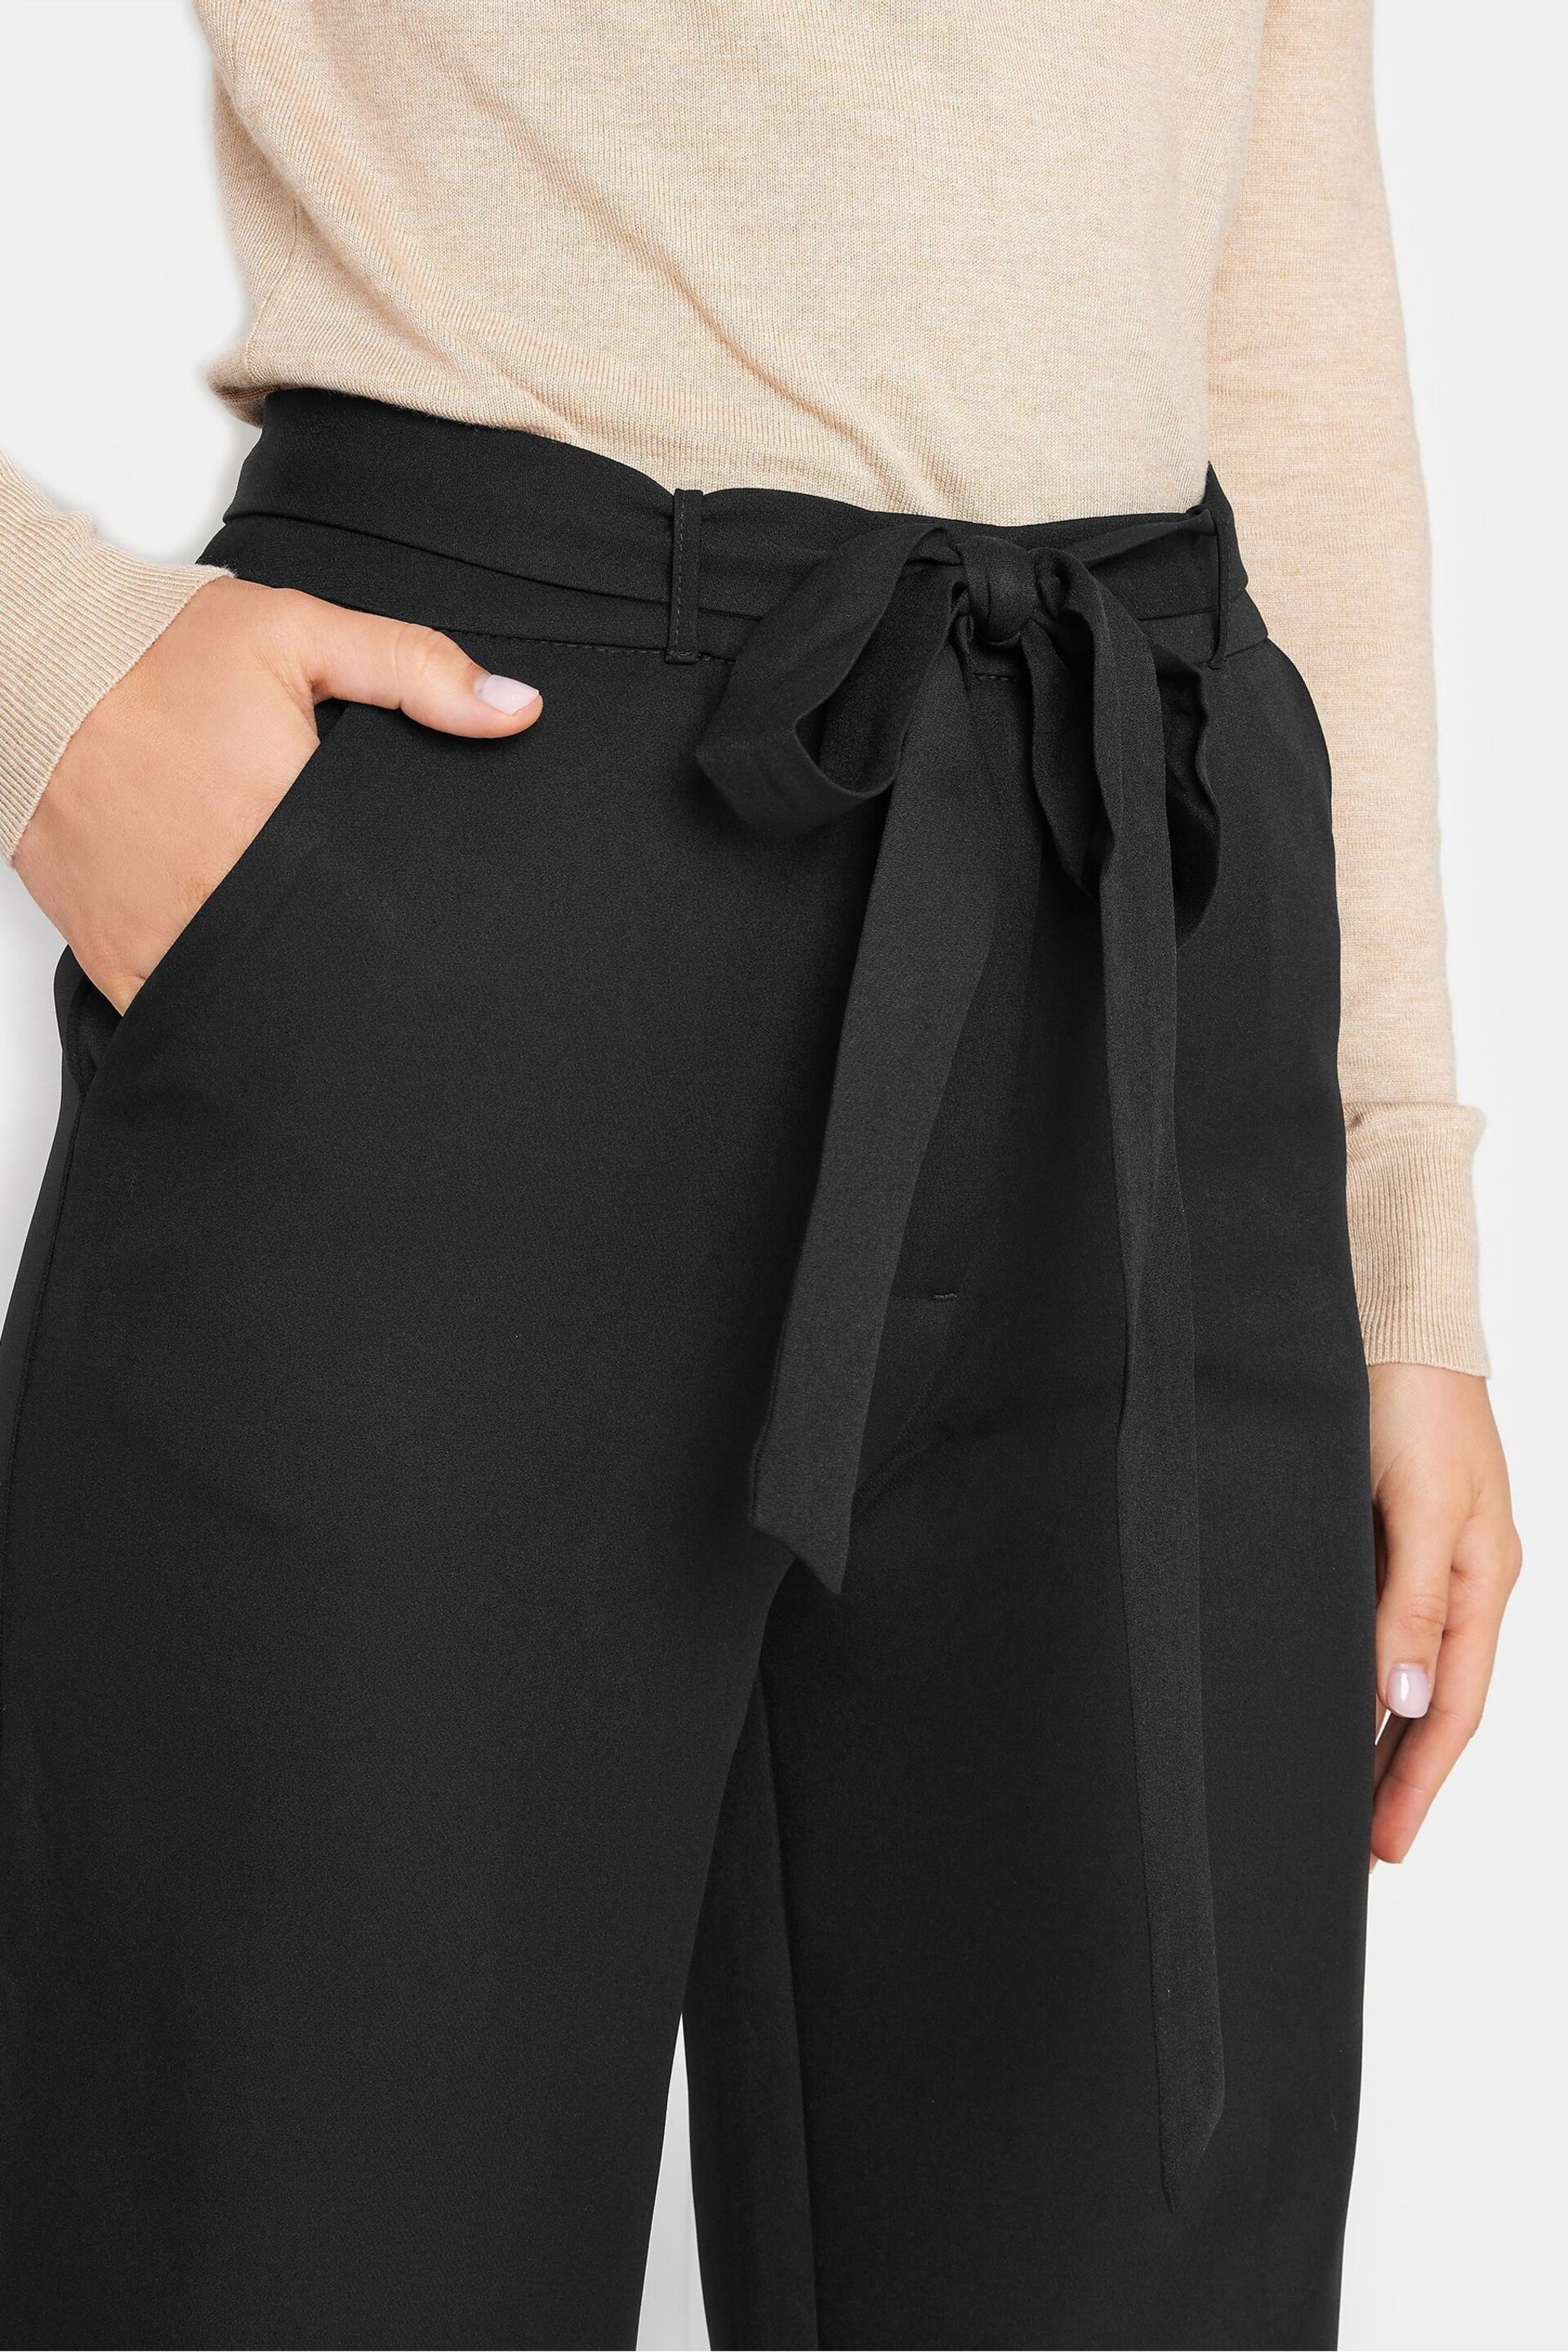 Long Tall Sally Black Wide Leg Trousers - Image 3 of 3